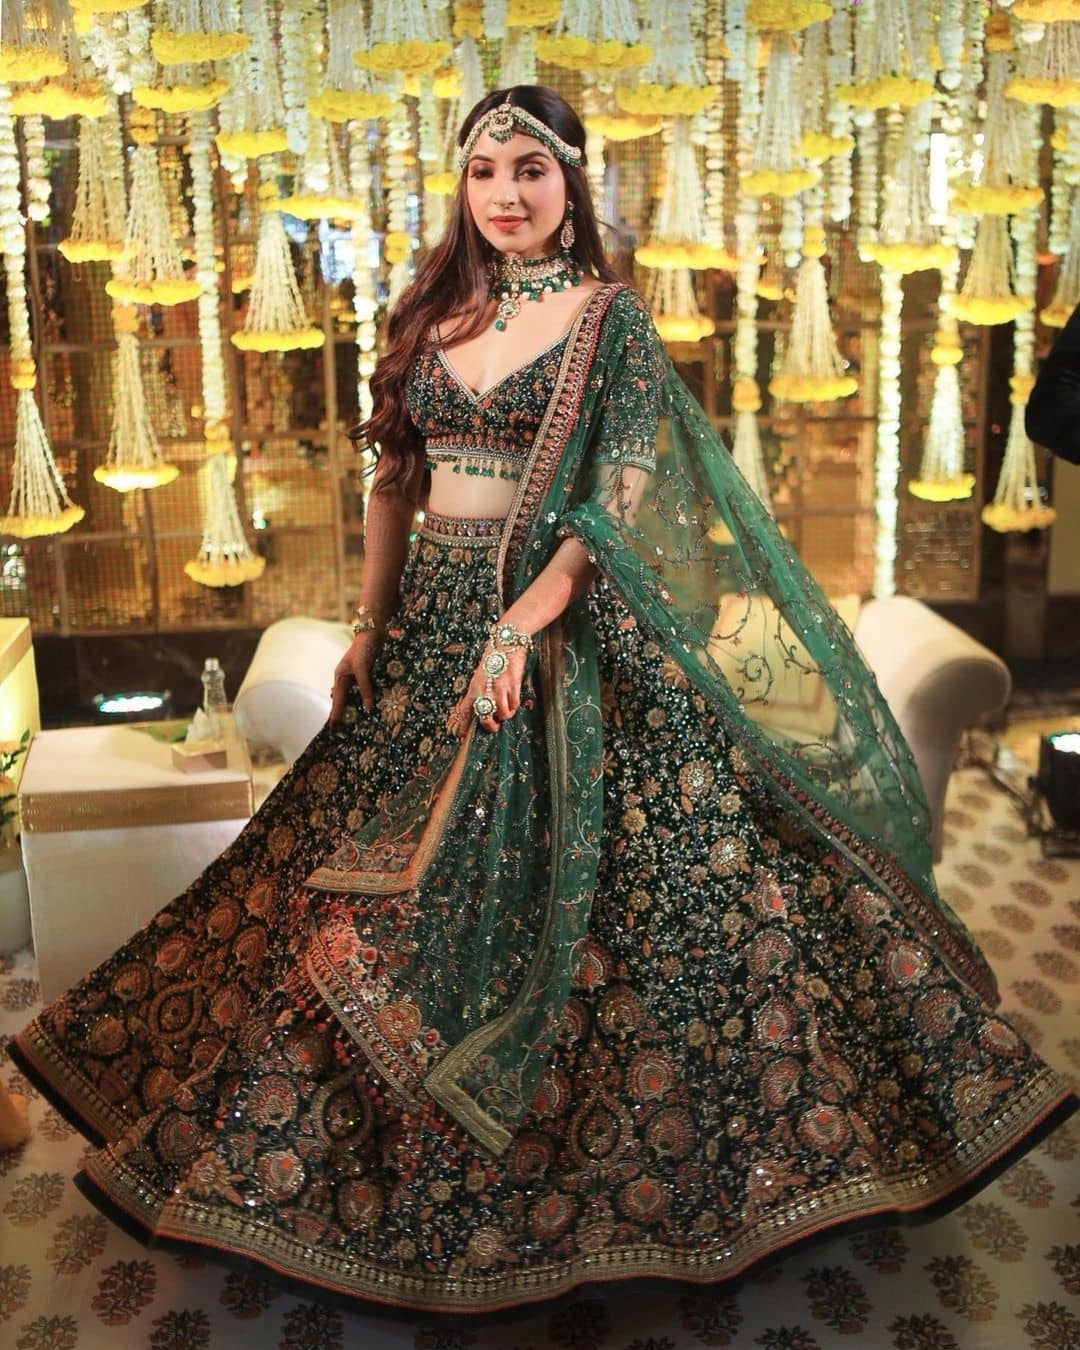 heavily embroidered mehndi dress for bride with floral motifs